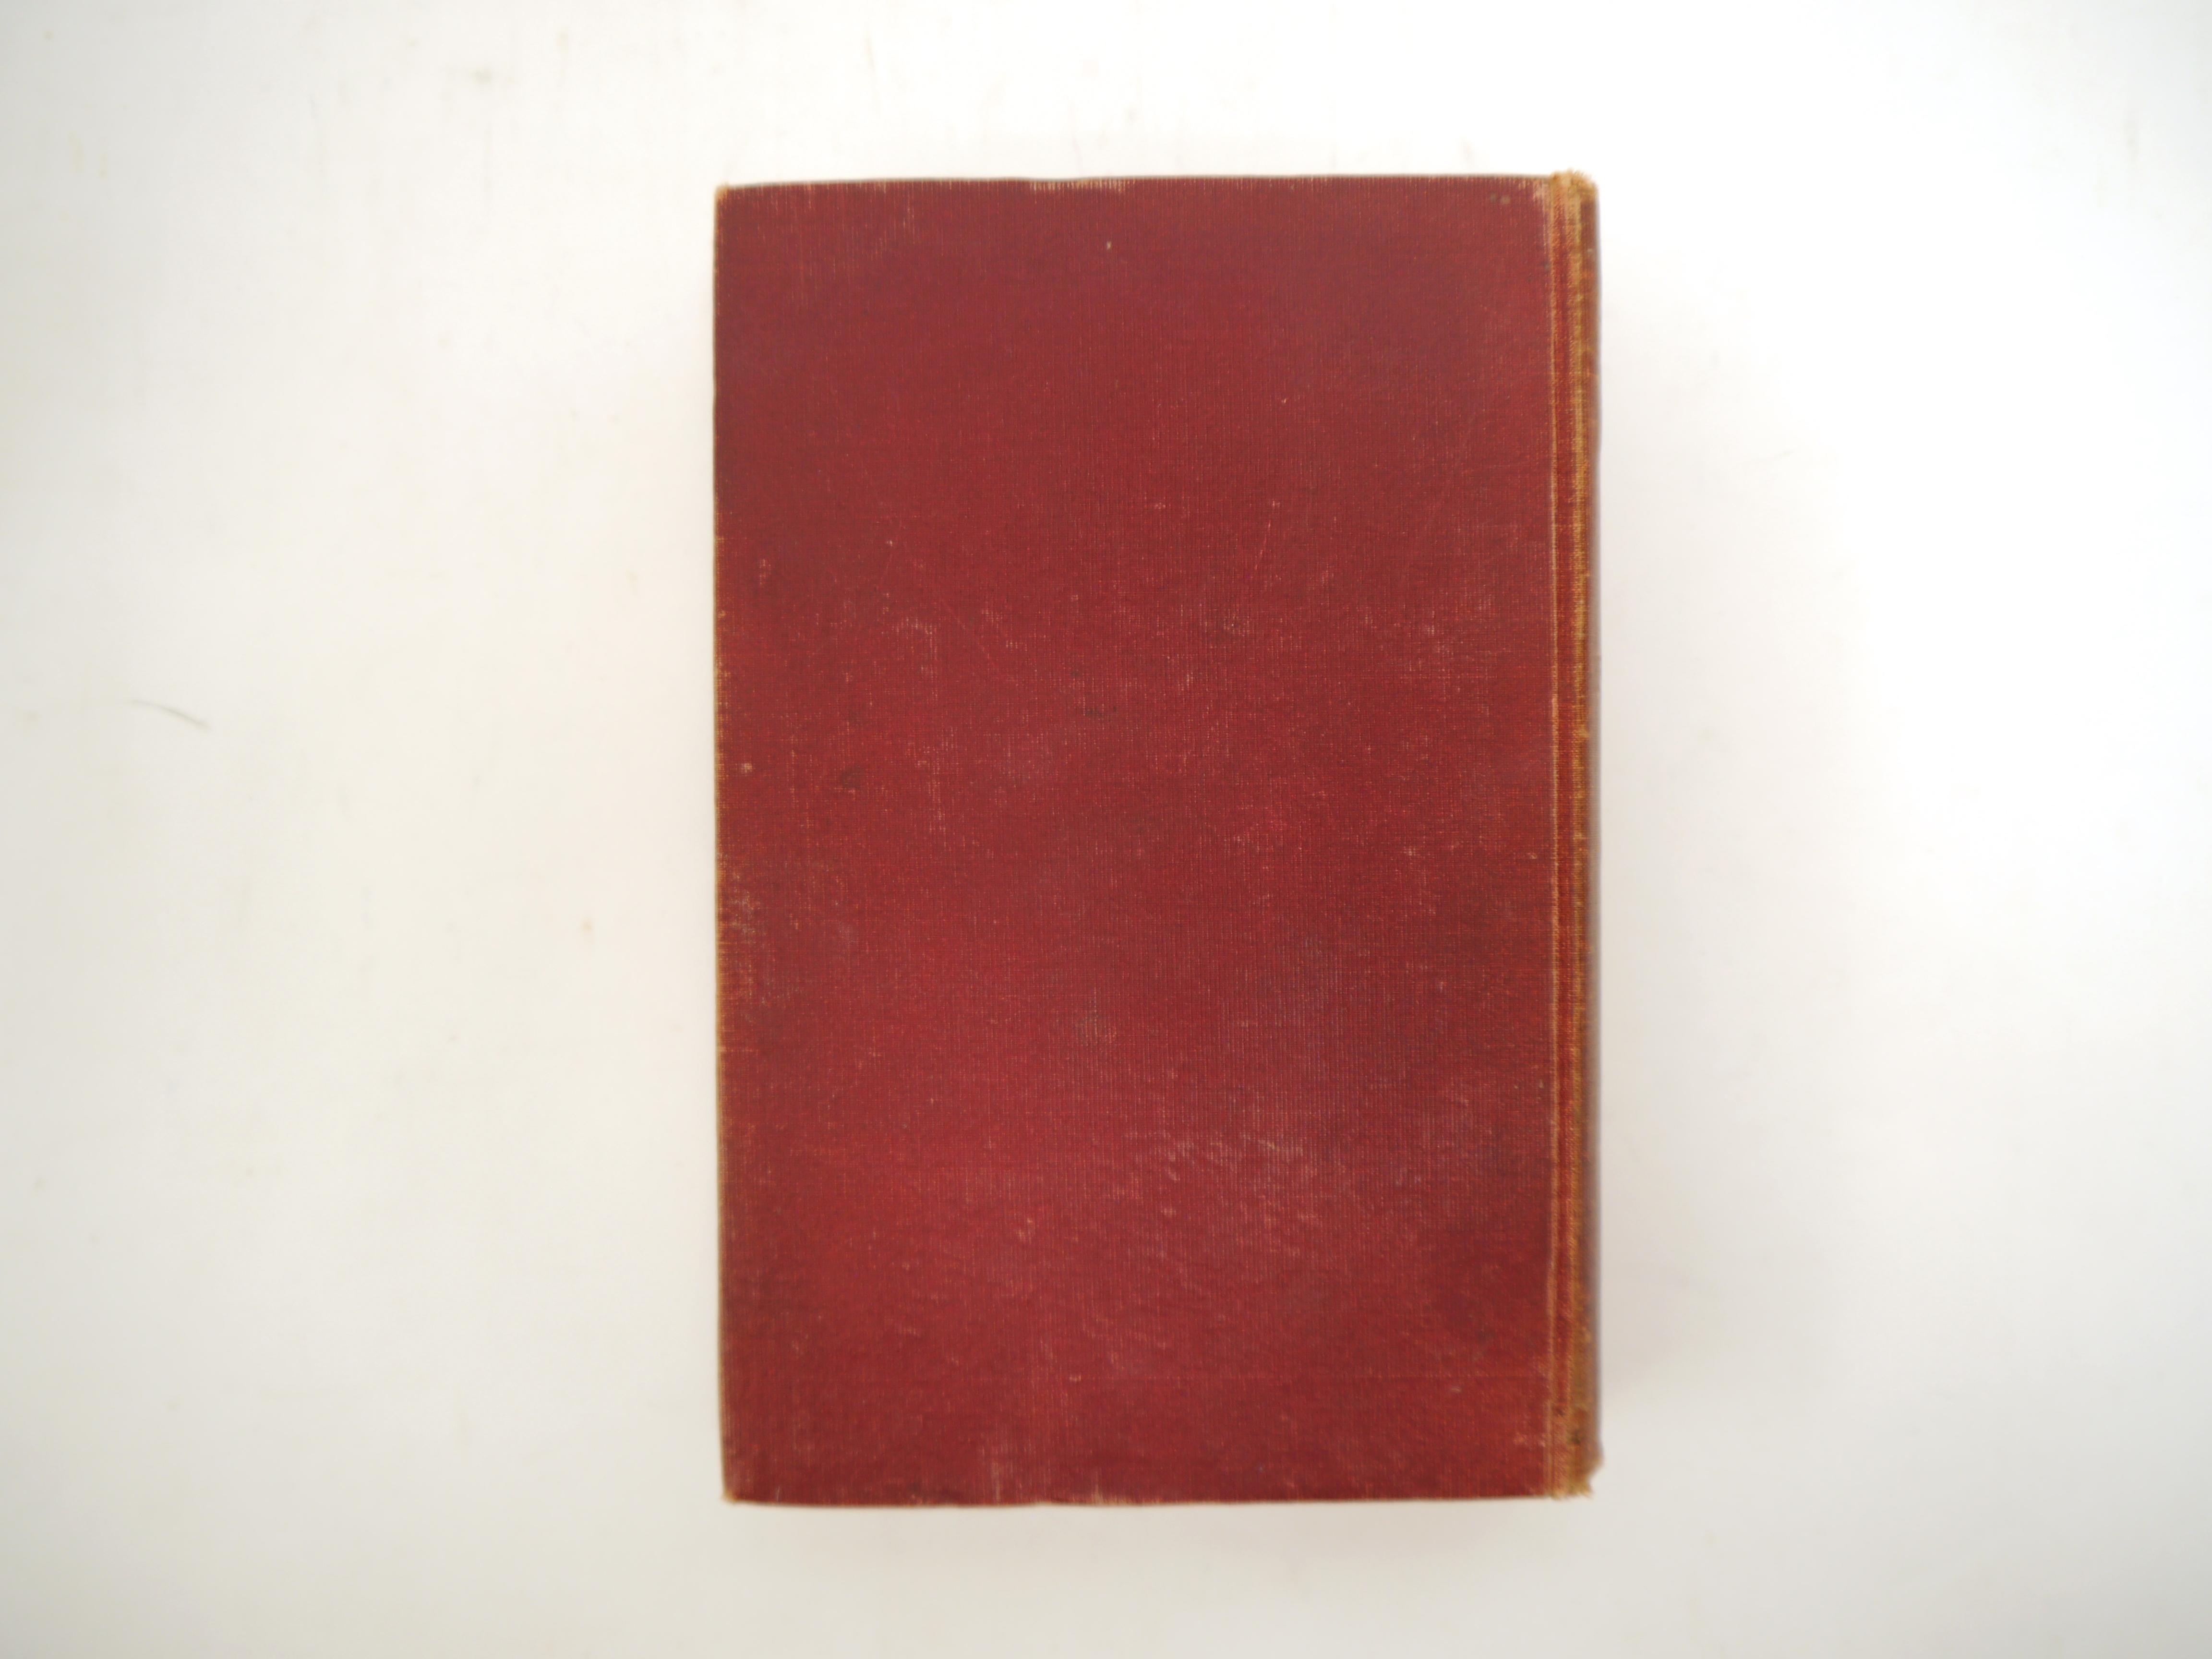 E.M. Forster: 'Howards End', London, Edward Arnold, 1910, 1st edition, seemingly an intermediate - Image 9 of 11